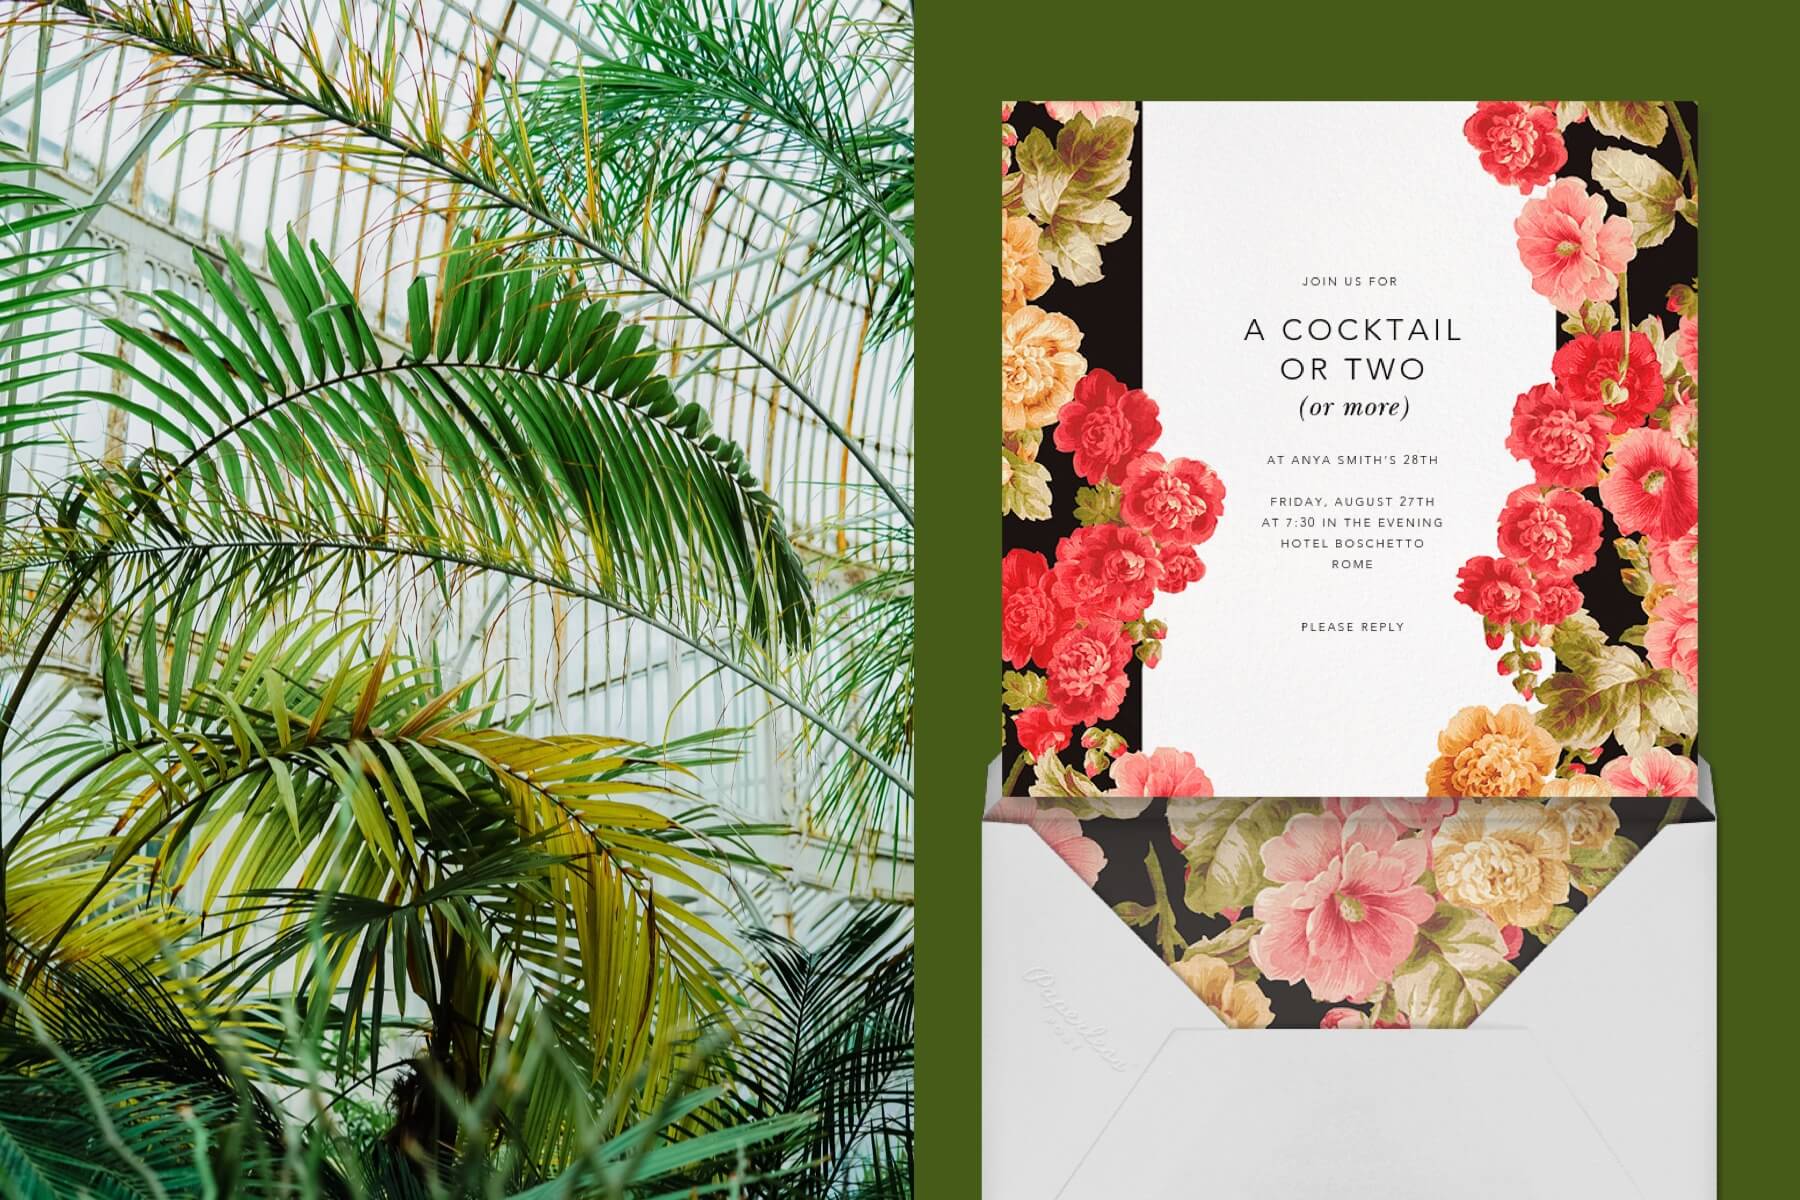 left: Palm fronds in a greenhouse. Right: A floral invitation for a cocktail party. 